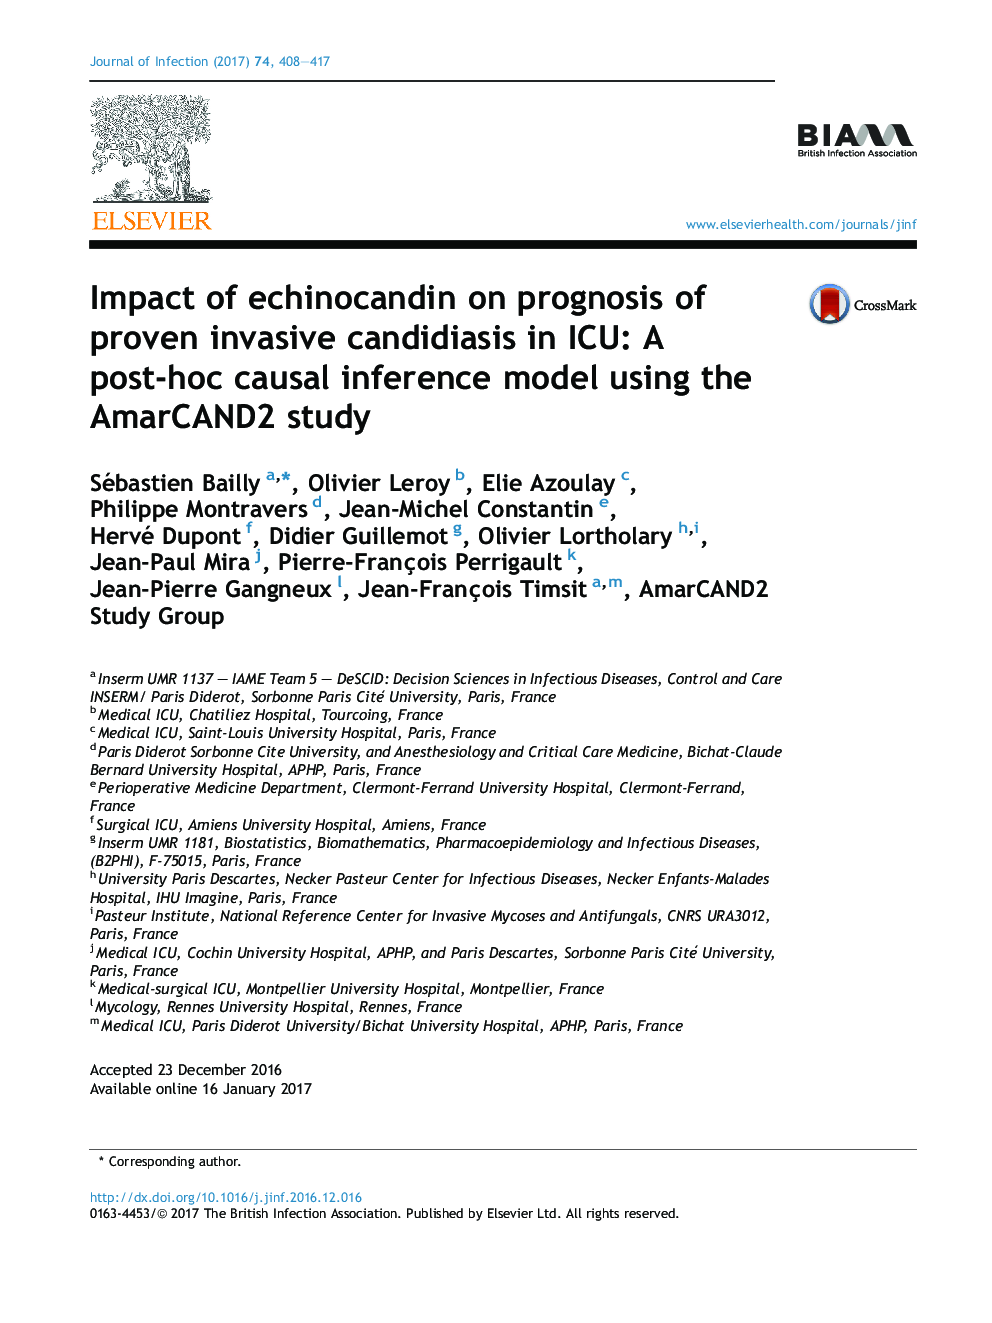 Impact of echinocandin on prognosis of proven invasive candidiasis in ICU: A post-hoc causal inference model using the AmarCAND2 study